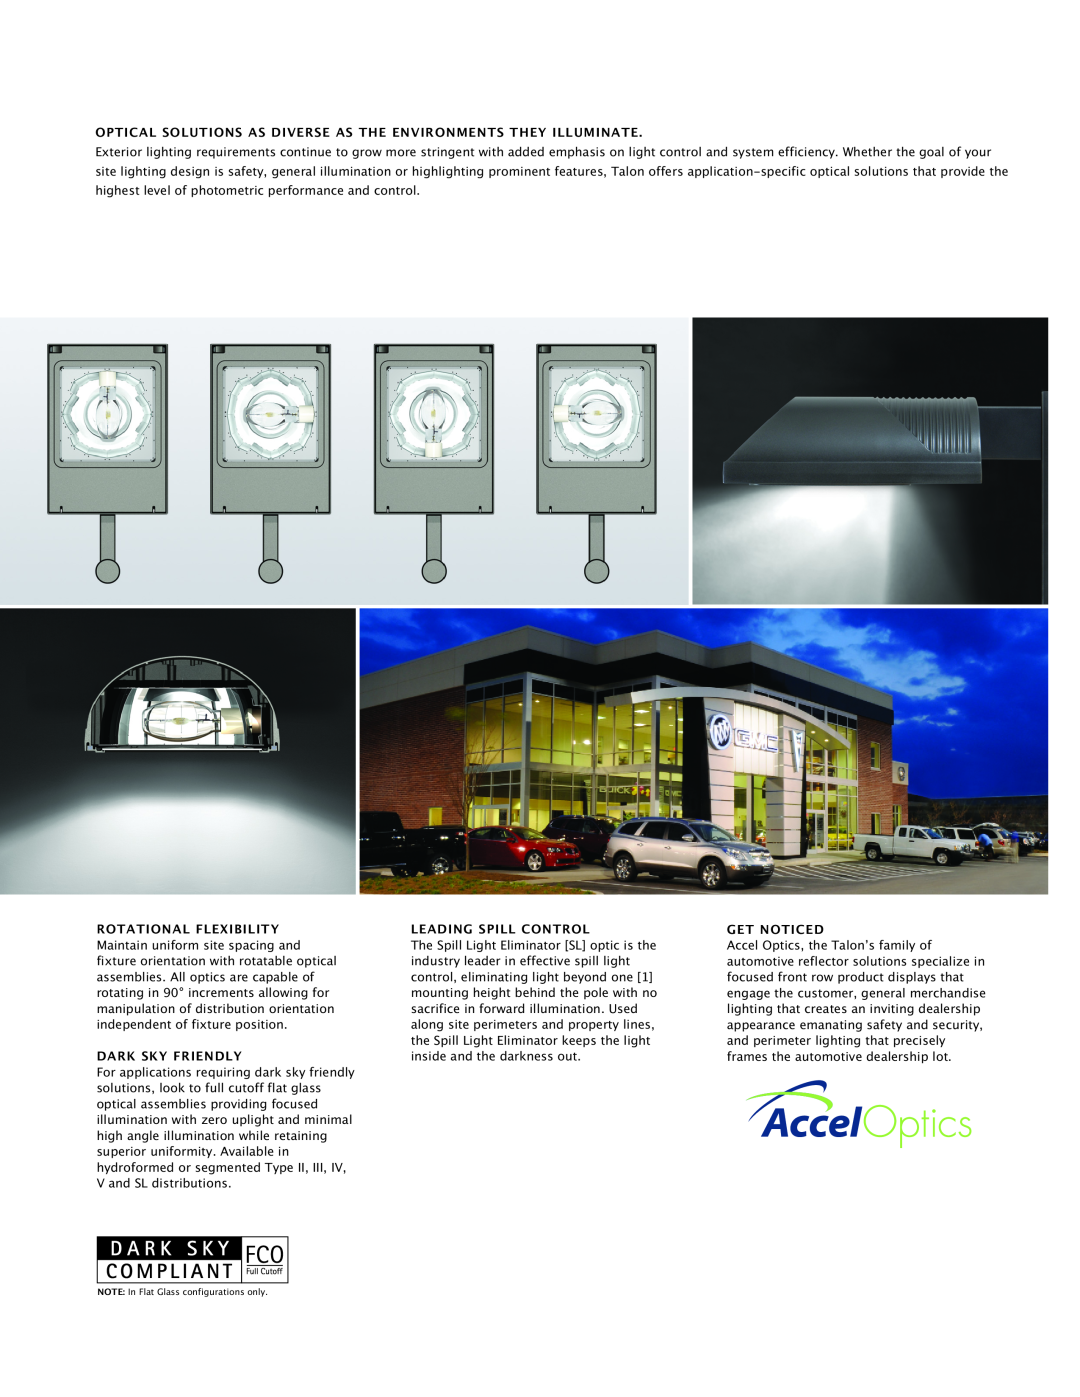 Cooper Lighting Area Luminaire manual Rotational Flexibility, Dark Sky Friendly, Leading Spill Control, Get Noticed 